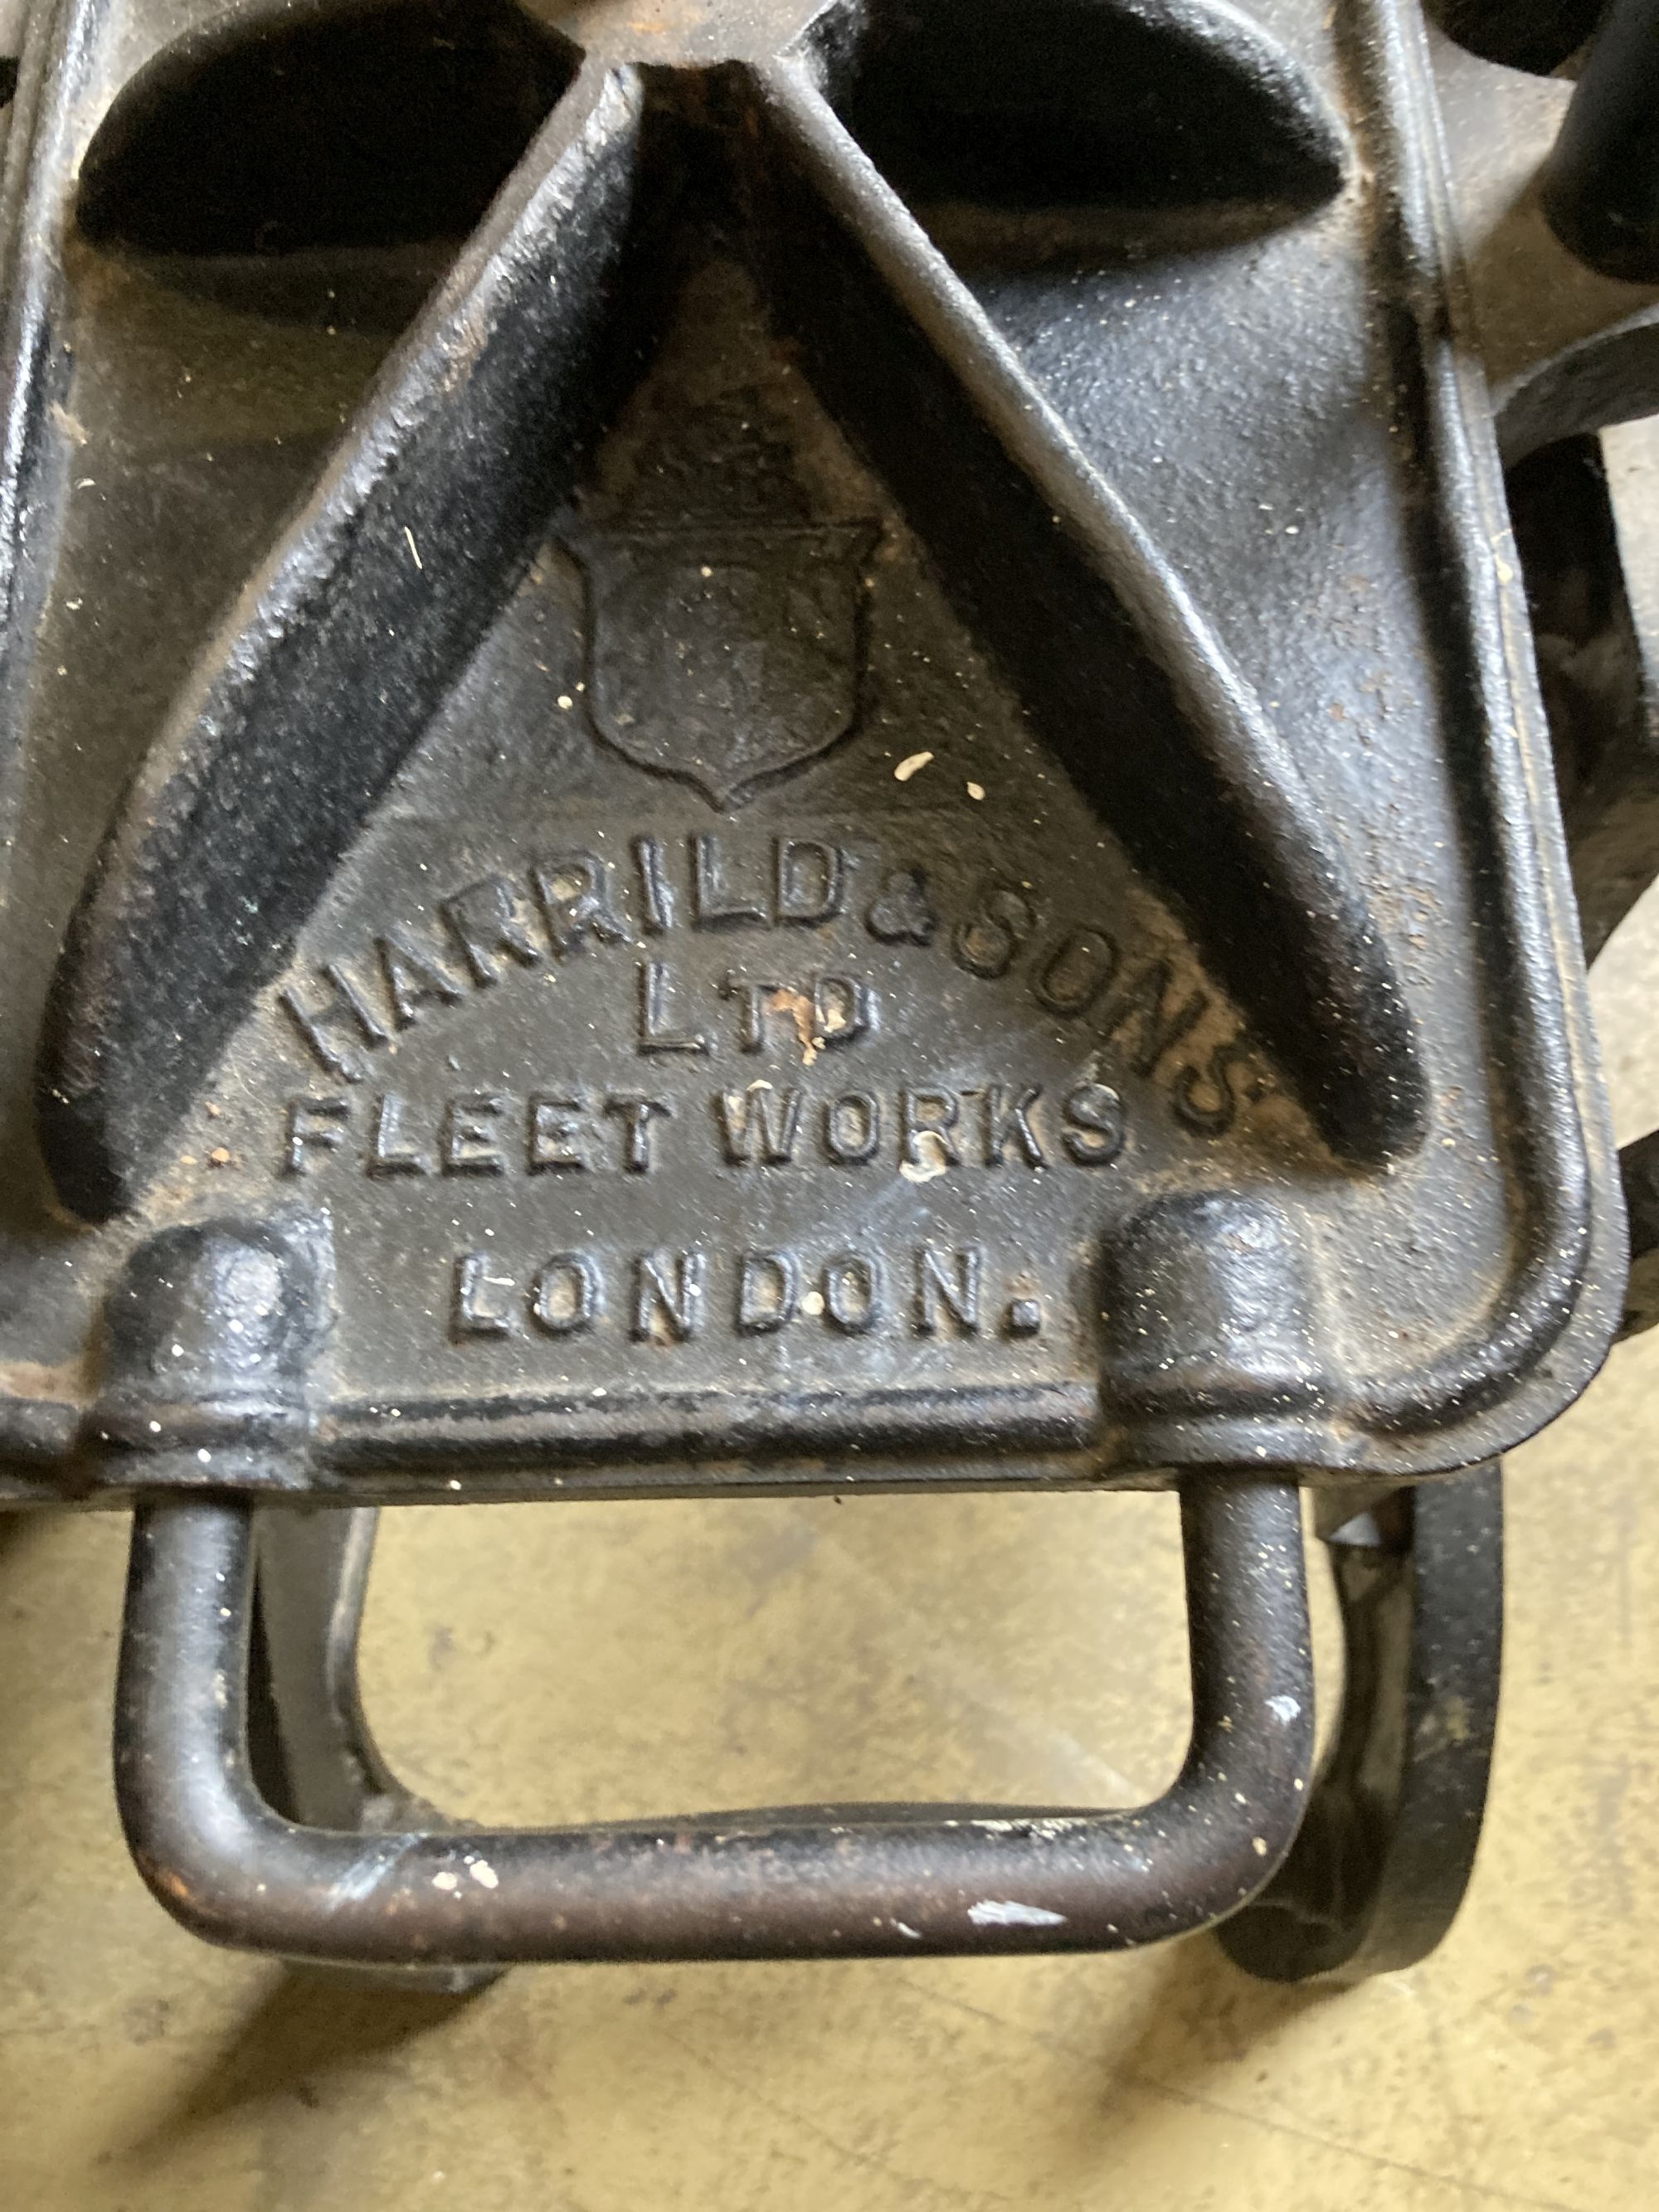 A Harrild and Sons cast iron lithographic press, with later brass plaque - F.W. Woodruff & Co. Ltd., width 44cm, depth 74cm, height 86c